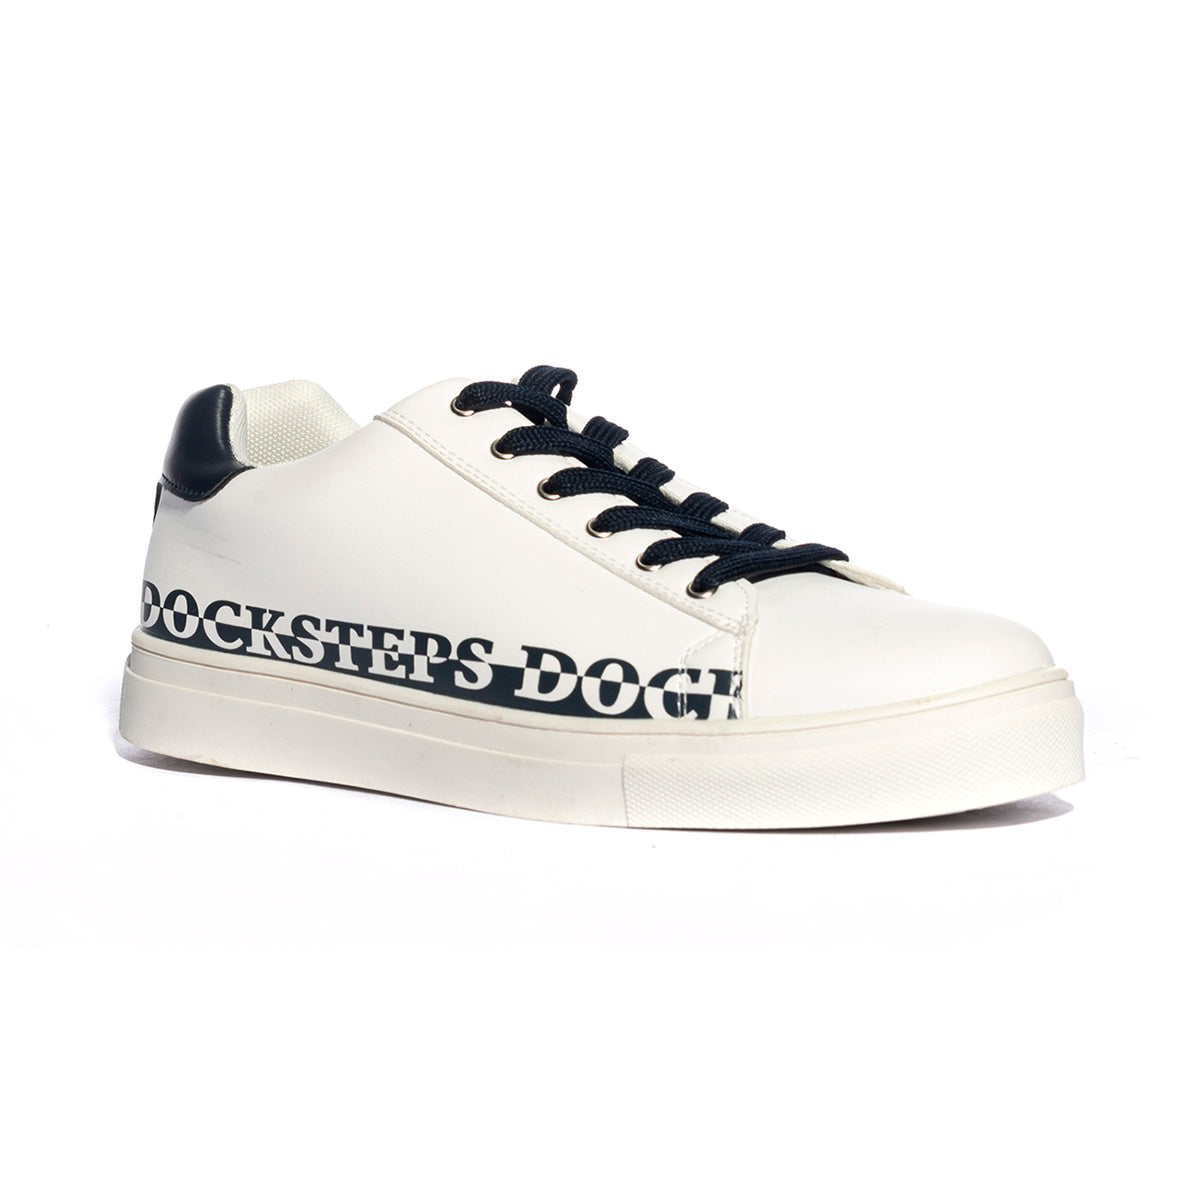 Sneakers Docksteps Glory1 Bianche